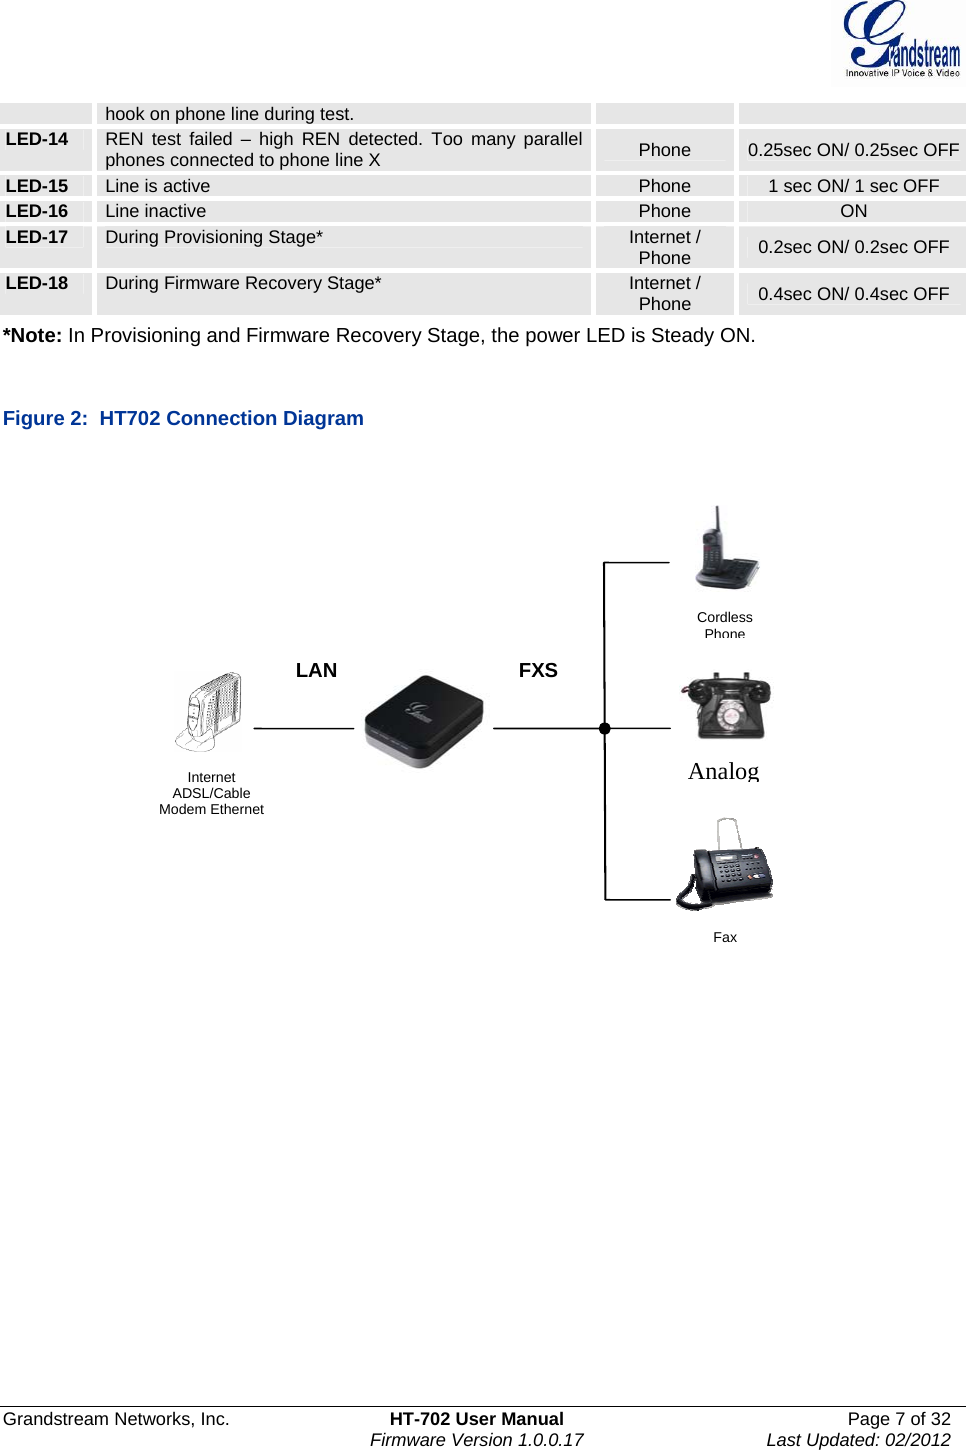  Grandstream Networks, Inc.  HT-702 User Manual  Page 7 of 32    Firmware Version 1.0.0.17  Last Updated: 02/2012  hook on phone line during test. LED-14  REN test failed – high REN detected. Too many parallel phones connected to phone line X  Phone  0.25sec ON/ 0.25sec OFFLED-15  Line is active  Phone  1 sec ON/ 1 sec OFF LED-16  Line inactive  Phone  ON LED-17  During Provisioning Stage*  Internet / Phone  0.2sec ON/ 0.2sec OFF LED-18  During Firmware Recovery Stage*  Internet / Phone  0.4sec ON/ 0.4sec OFF *Note: In Provisioning and Firmware Recovery Stage, the power LED is Steady ON.  Figure 2:  HT702 Connection Diagram             Internet ADSL/Cable Modem Ethernet LAN  FXSFax Cordless PhoneAnalog 